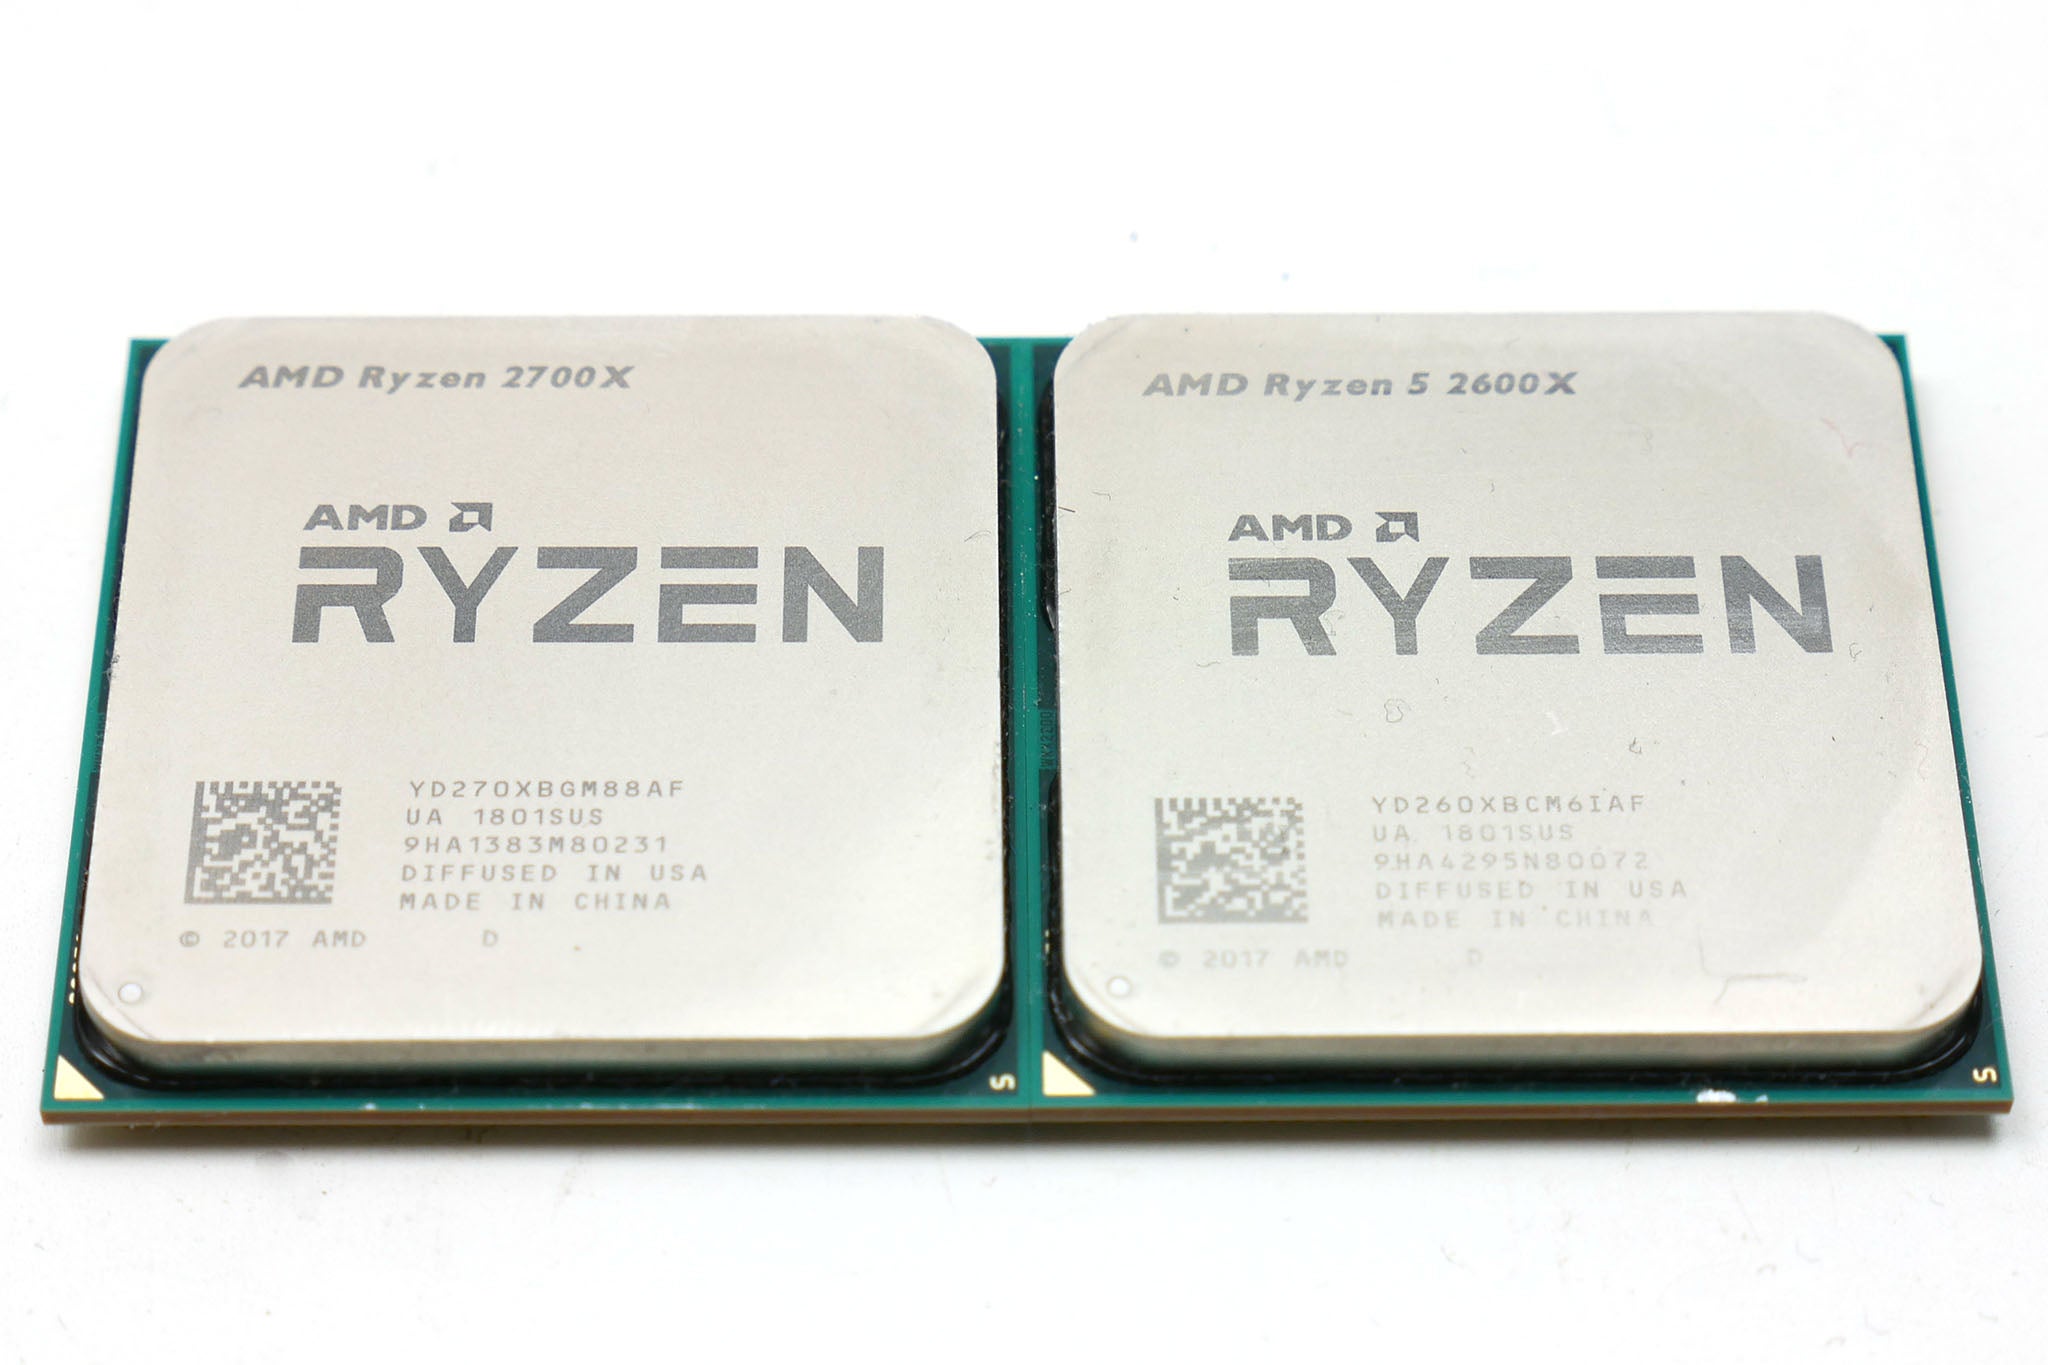 Ryzen 7 2700X Review: A worthy rival to Intel's 8th gen CPUs